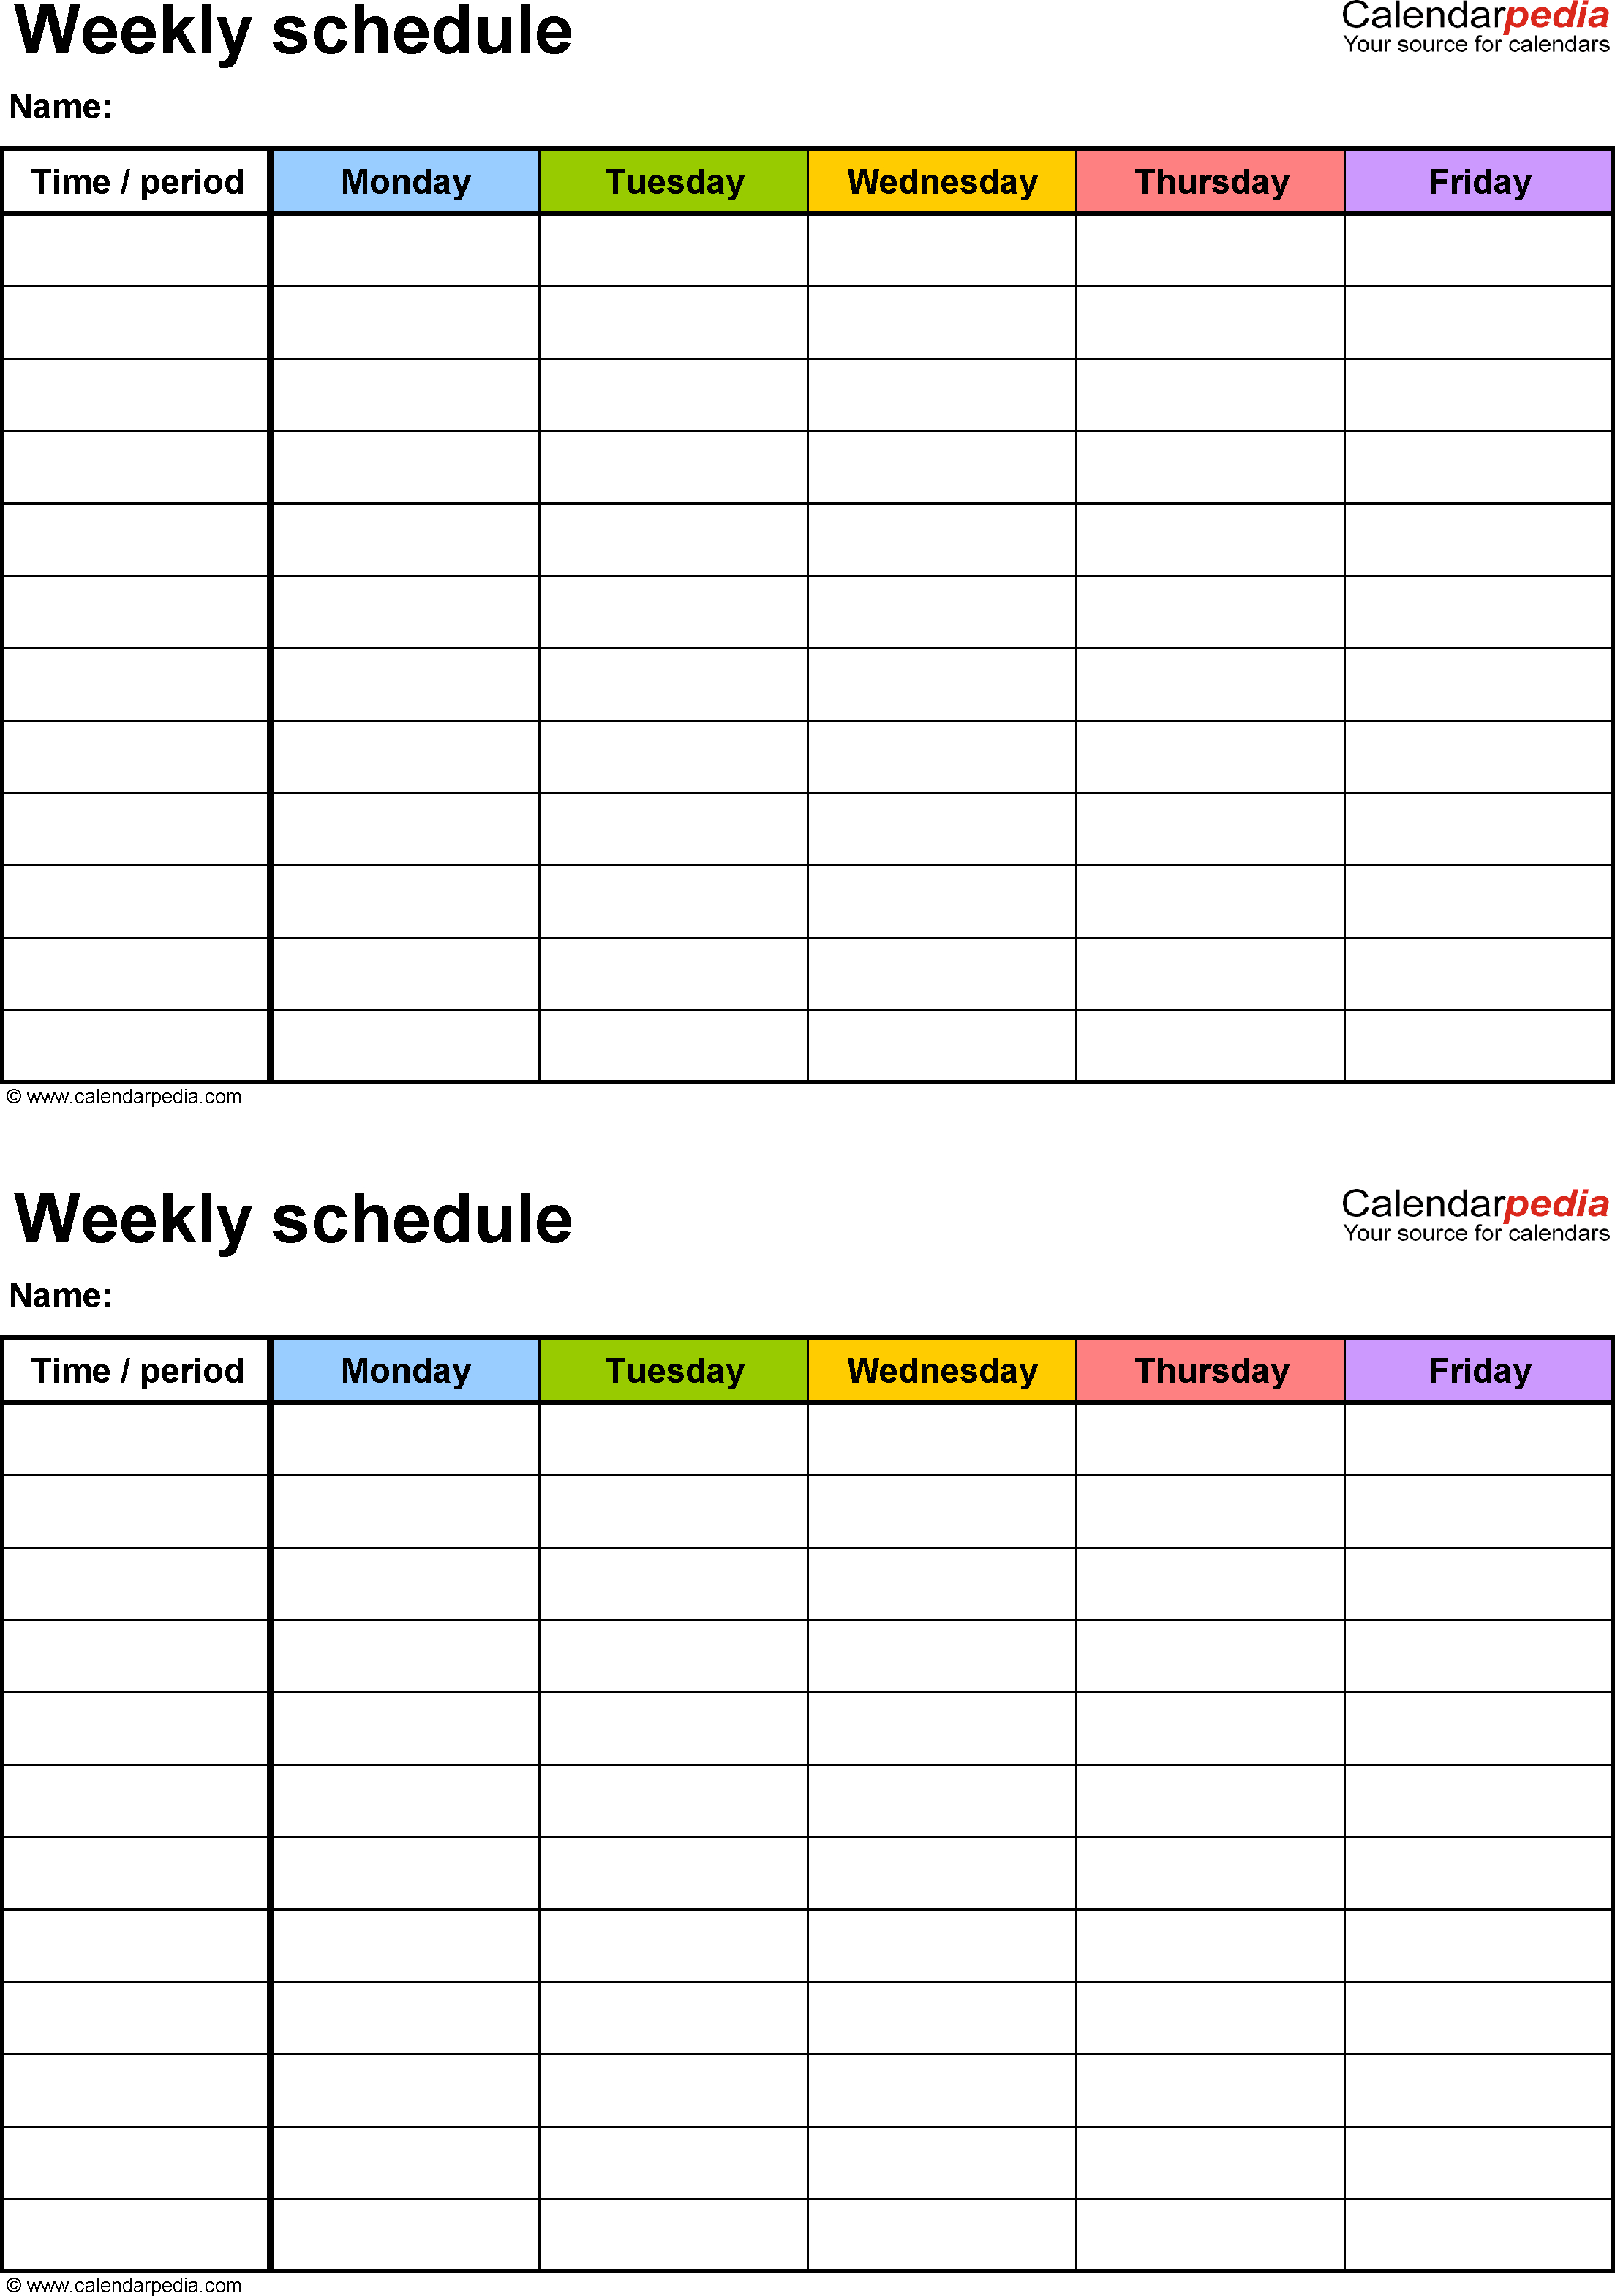 Free Weekly Schedule Templates For Pdf  18 Templates pertaining to Calendarpedia Weekly Schedule